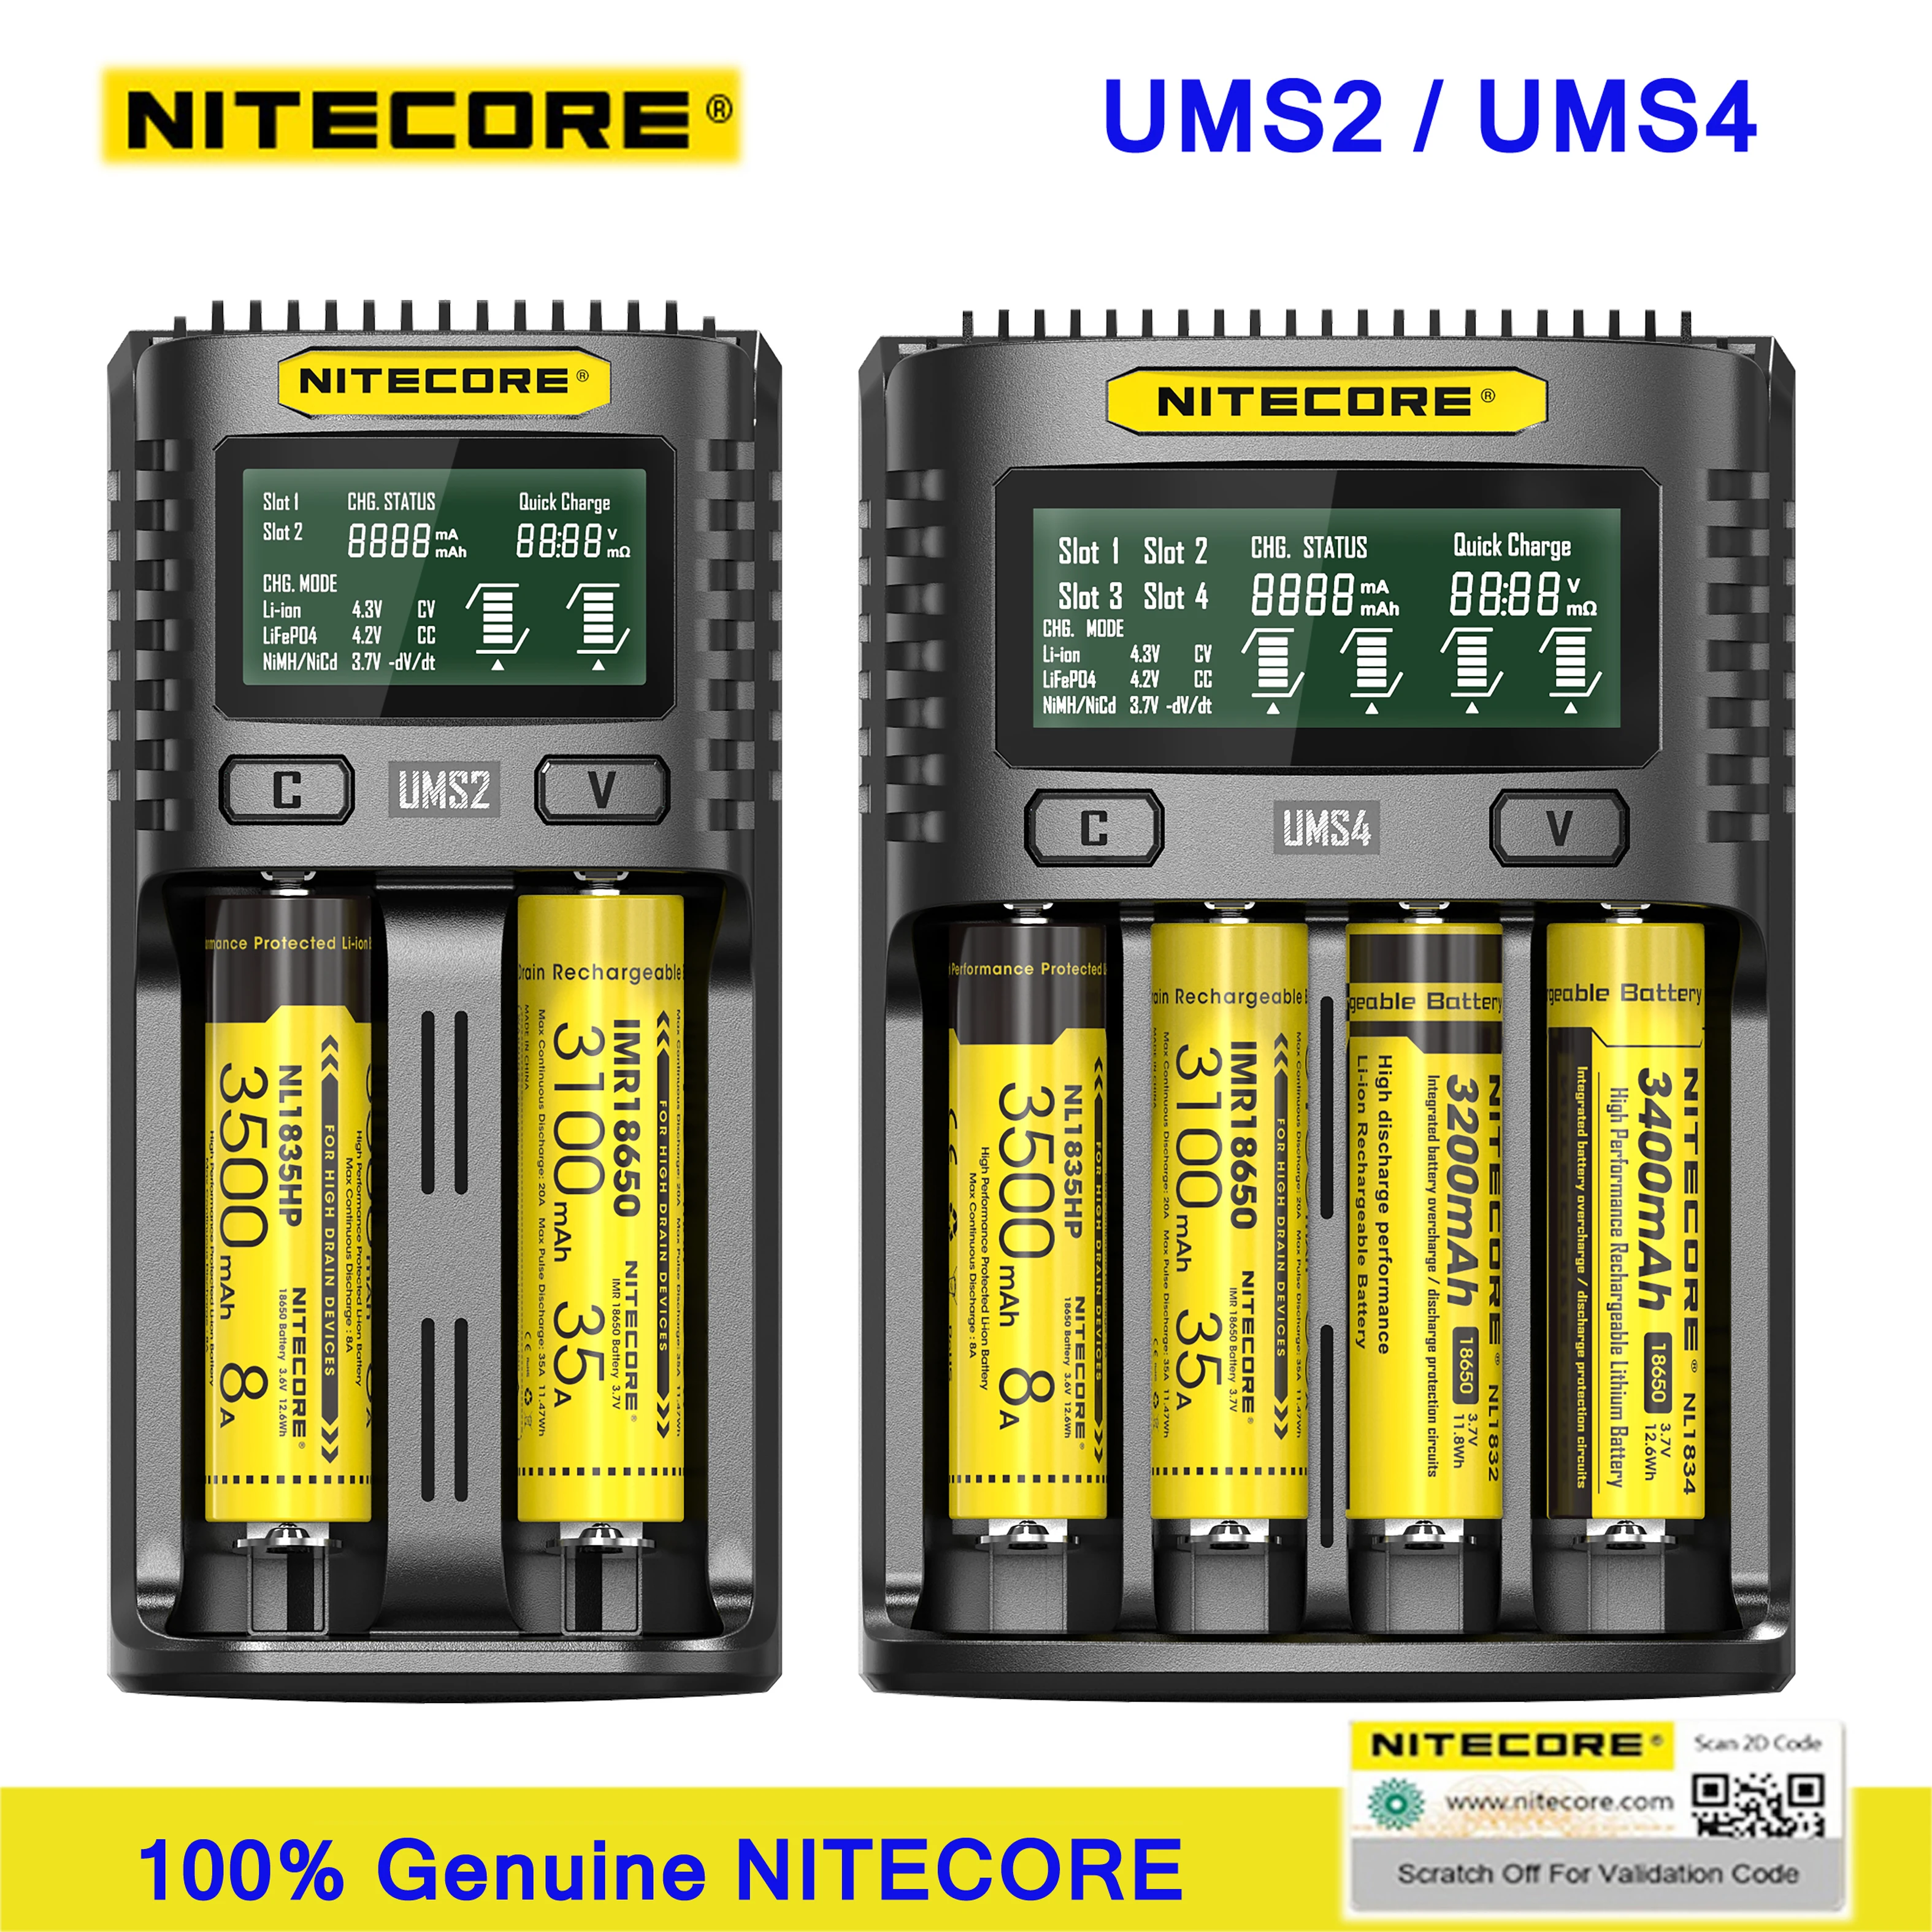 

Original NITECORE UMS4 UMS2 4A Intelligent Battery Charger USB Charger For IMR/Li-ion/LiFePO4/NI-Cd/Ni-MH AA AAA 18650